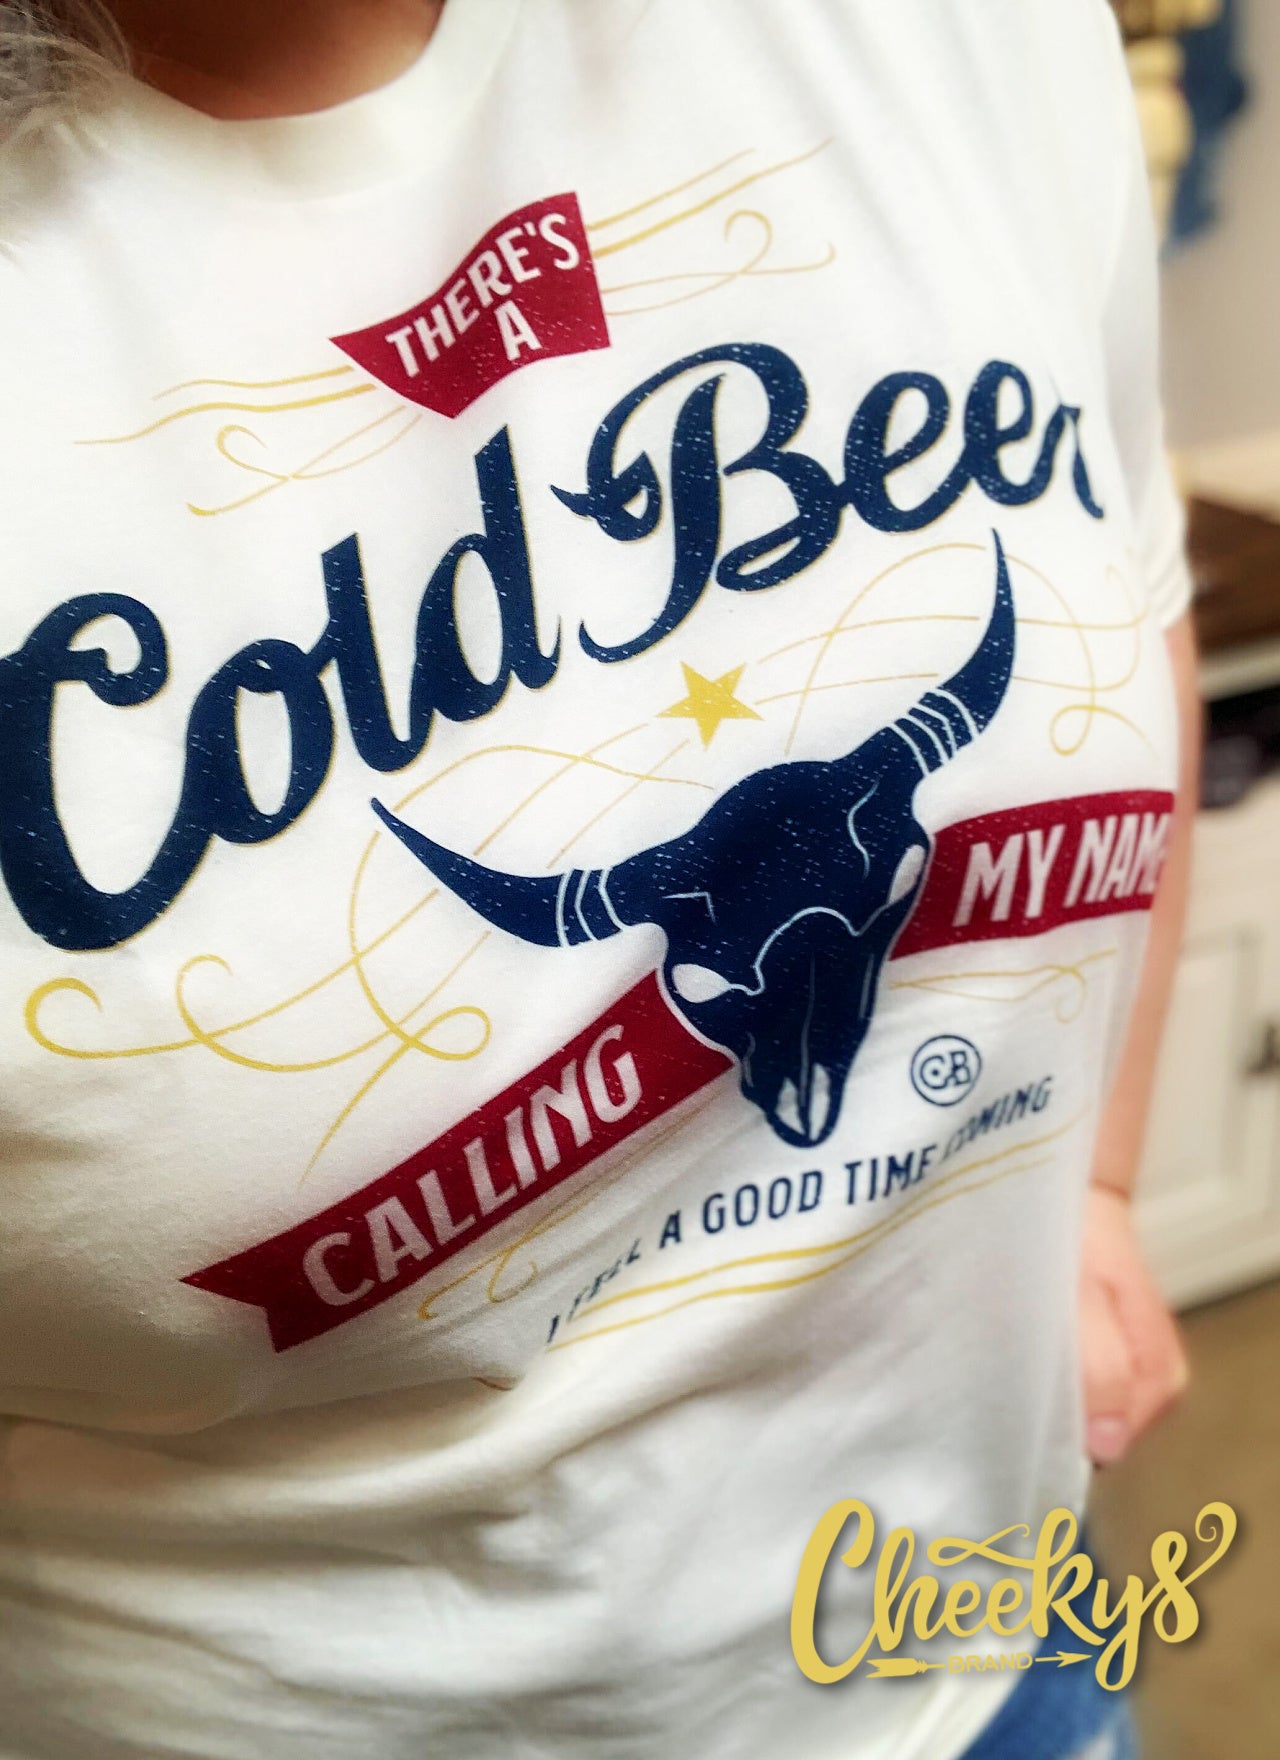 Cold Beer Calling My Name Unisex Tee on Barley White Cheekys Apparel 23 